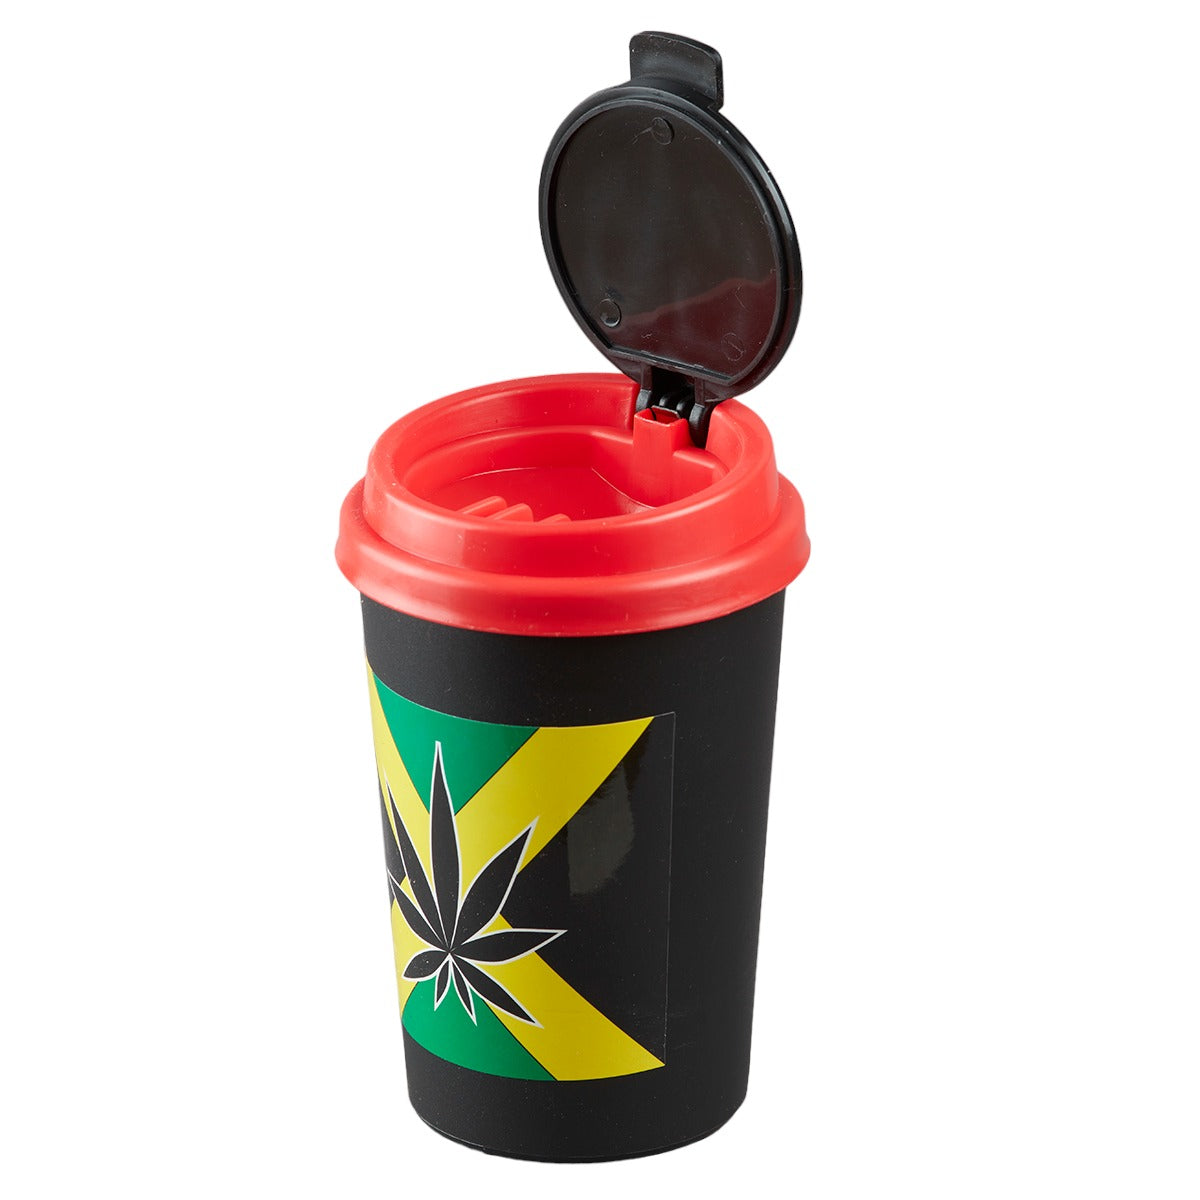 Plastic Car Ashtray Bucket with Lid for Smokers (9793)